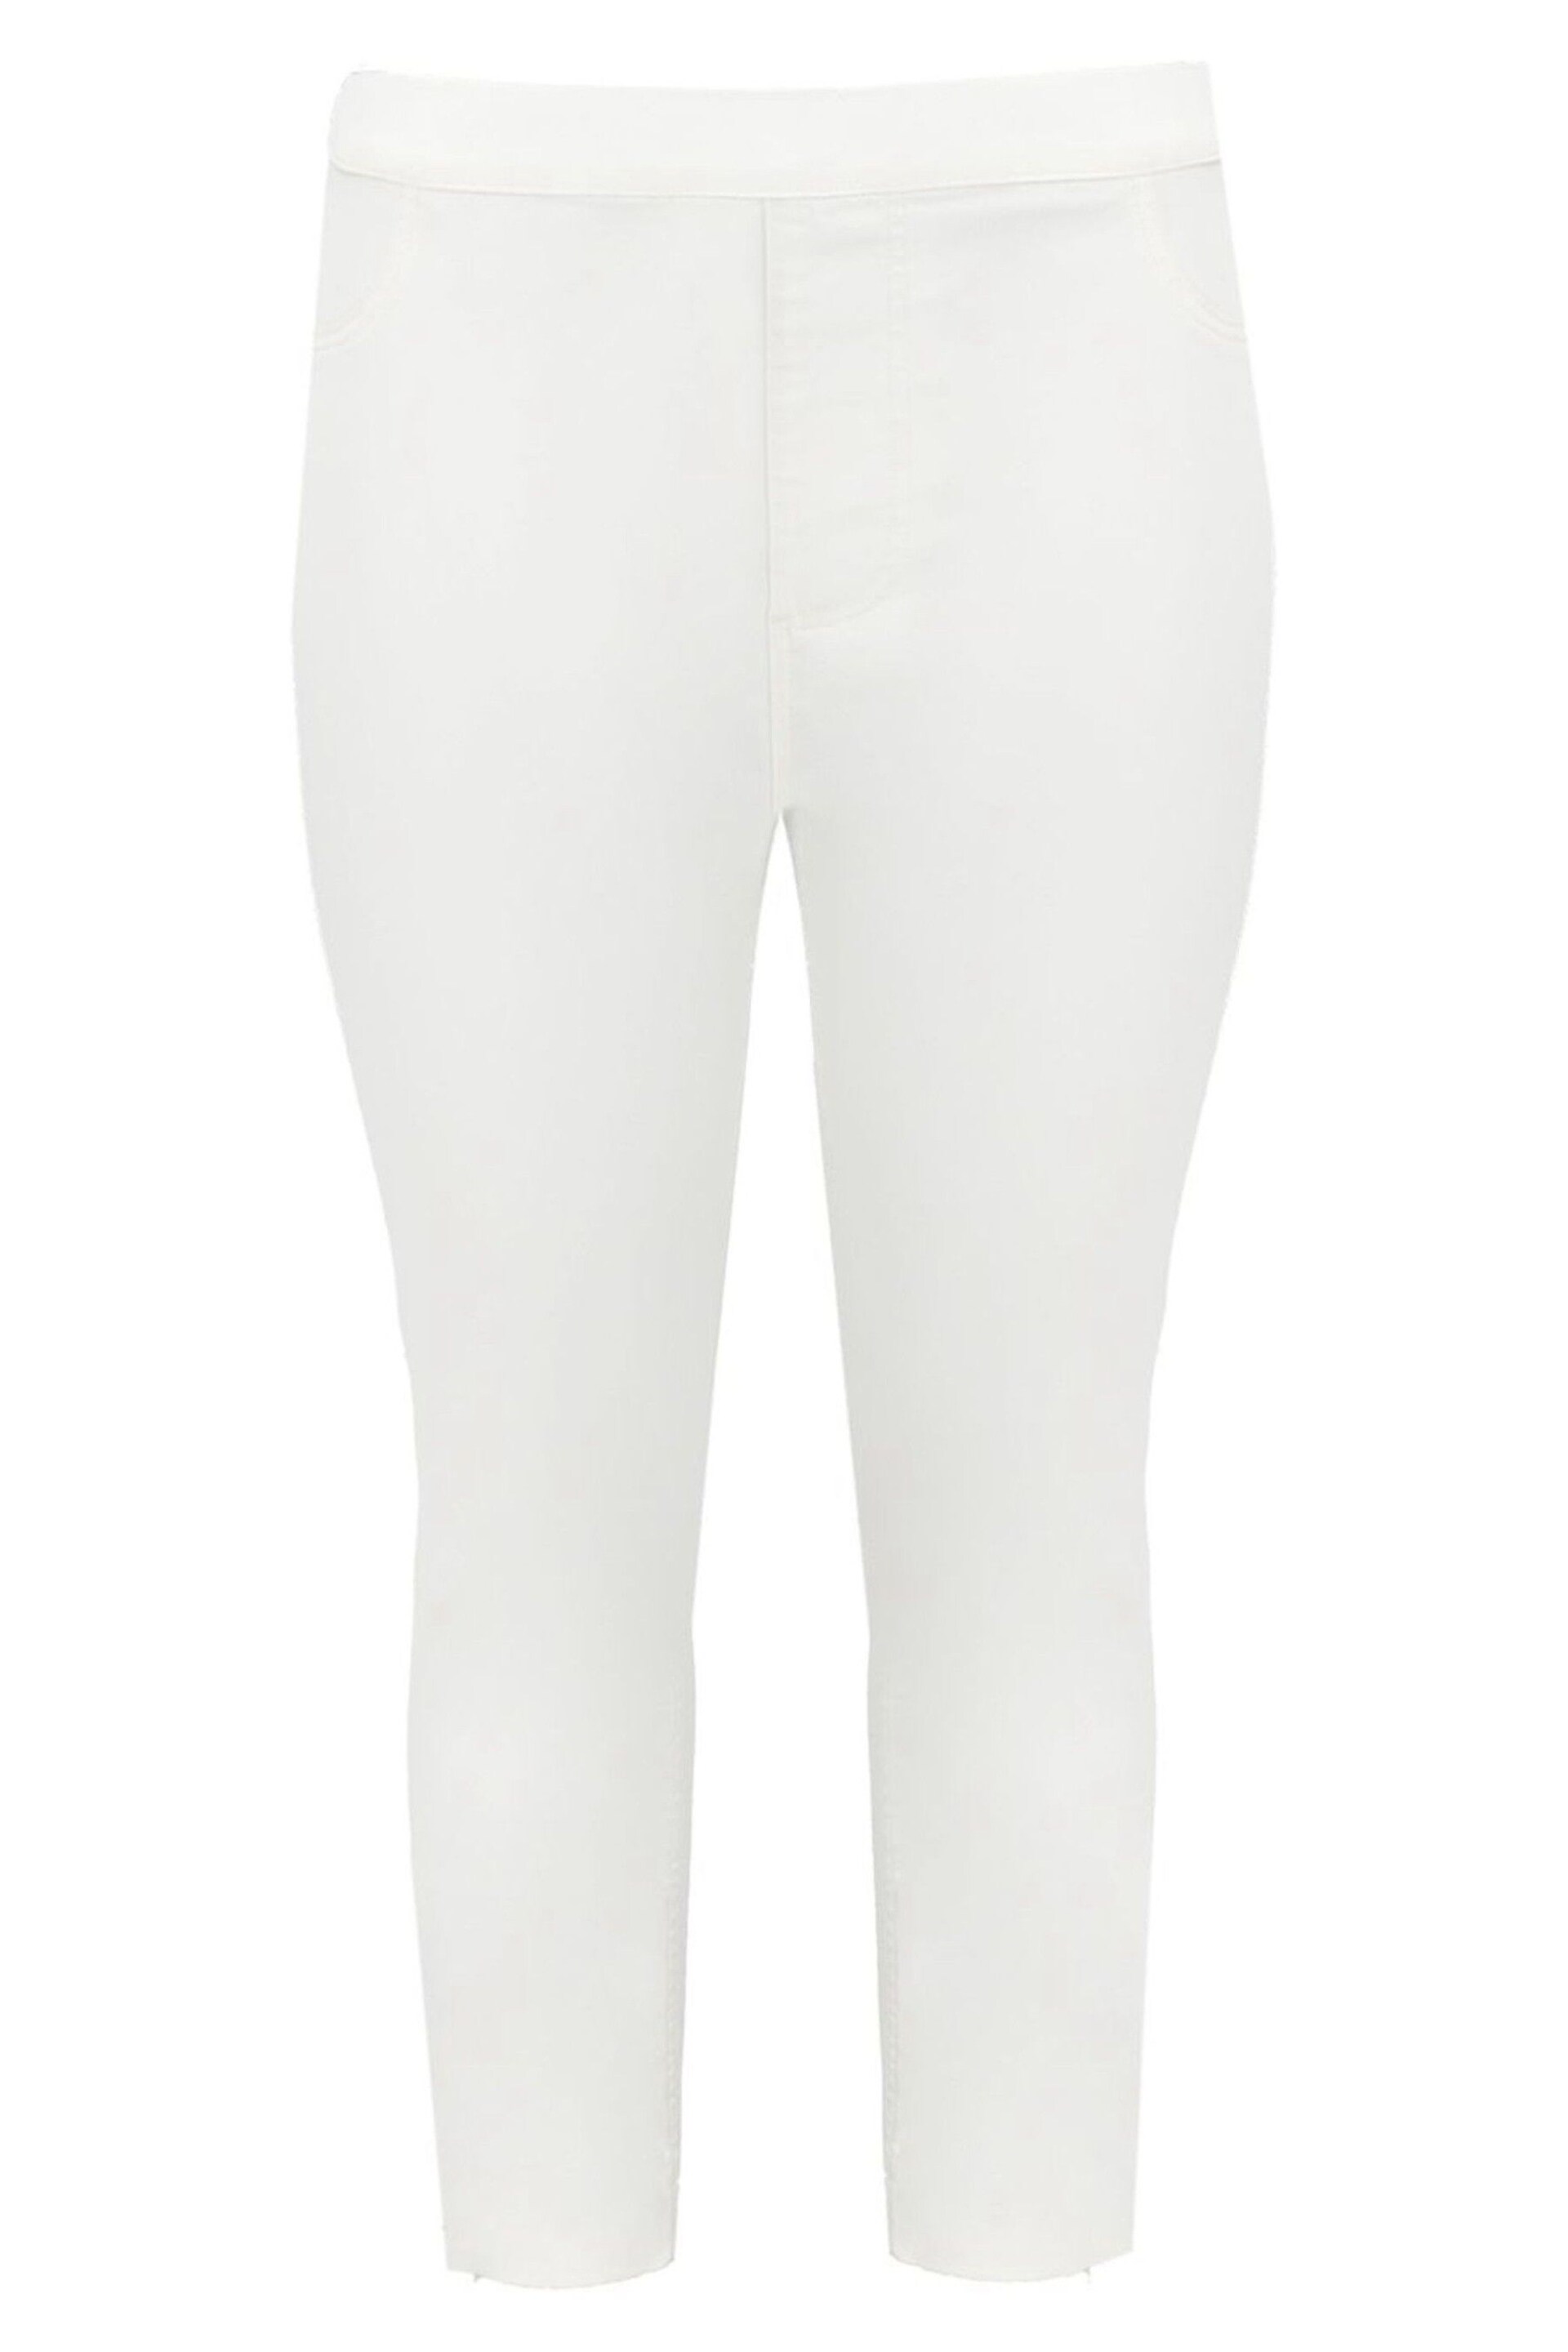 Live Unlimited Curve Ivory Cropped White Jeggings - Image 6 of 6